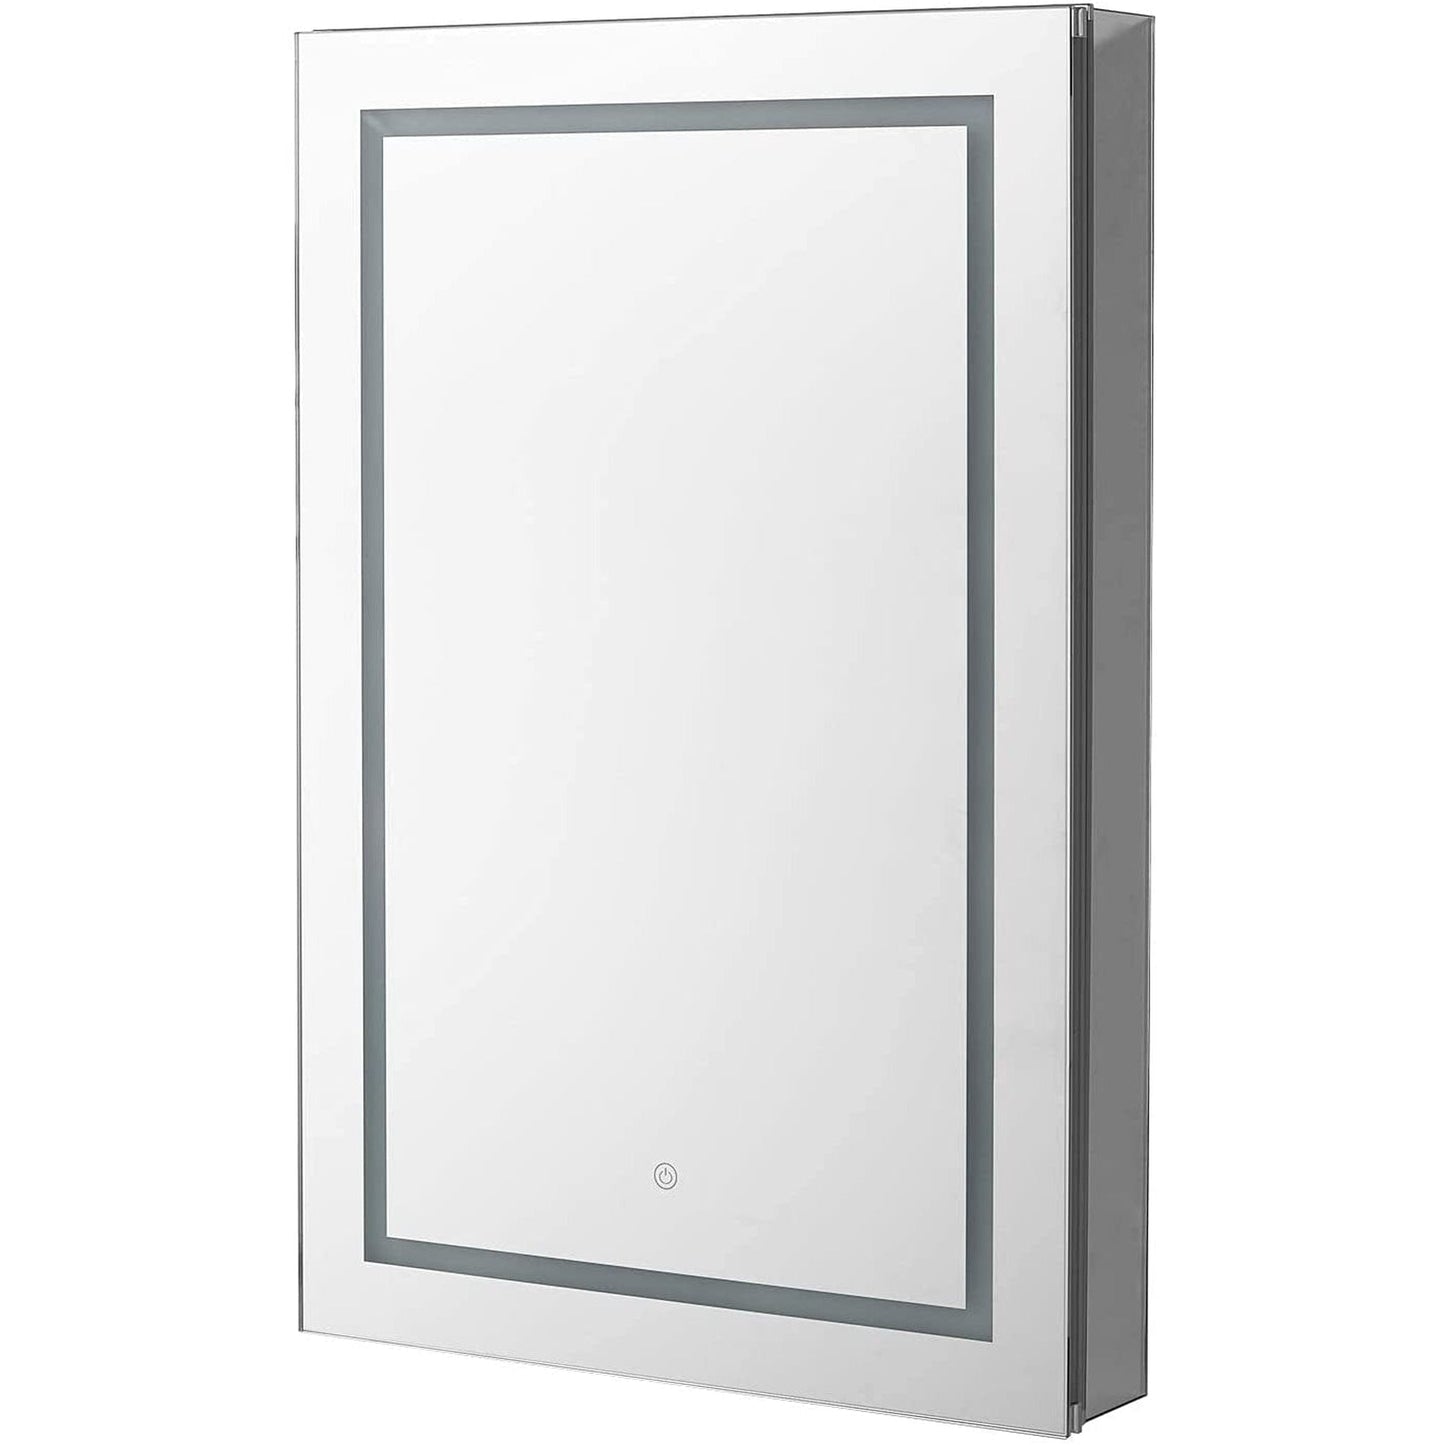 Aquadom Royale Basic Q 24" x 30" Single View Rectangle Right Hinged Recessed or Surface Mount Medicine Cabinet With LED Lighting, Touch Screen Button, Dimmer